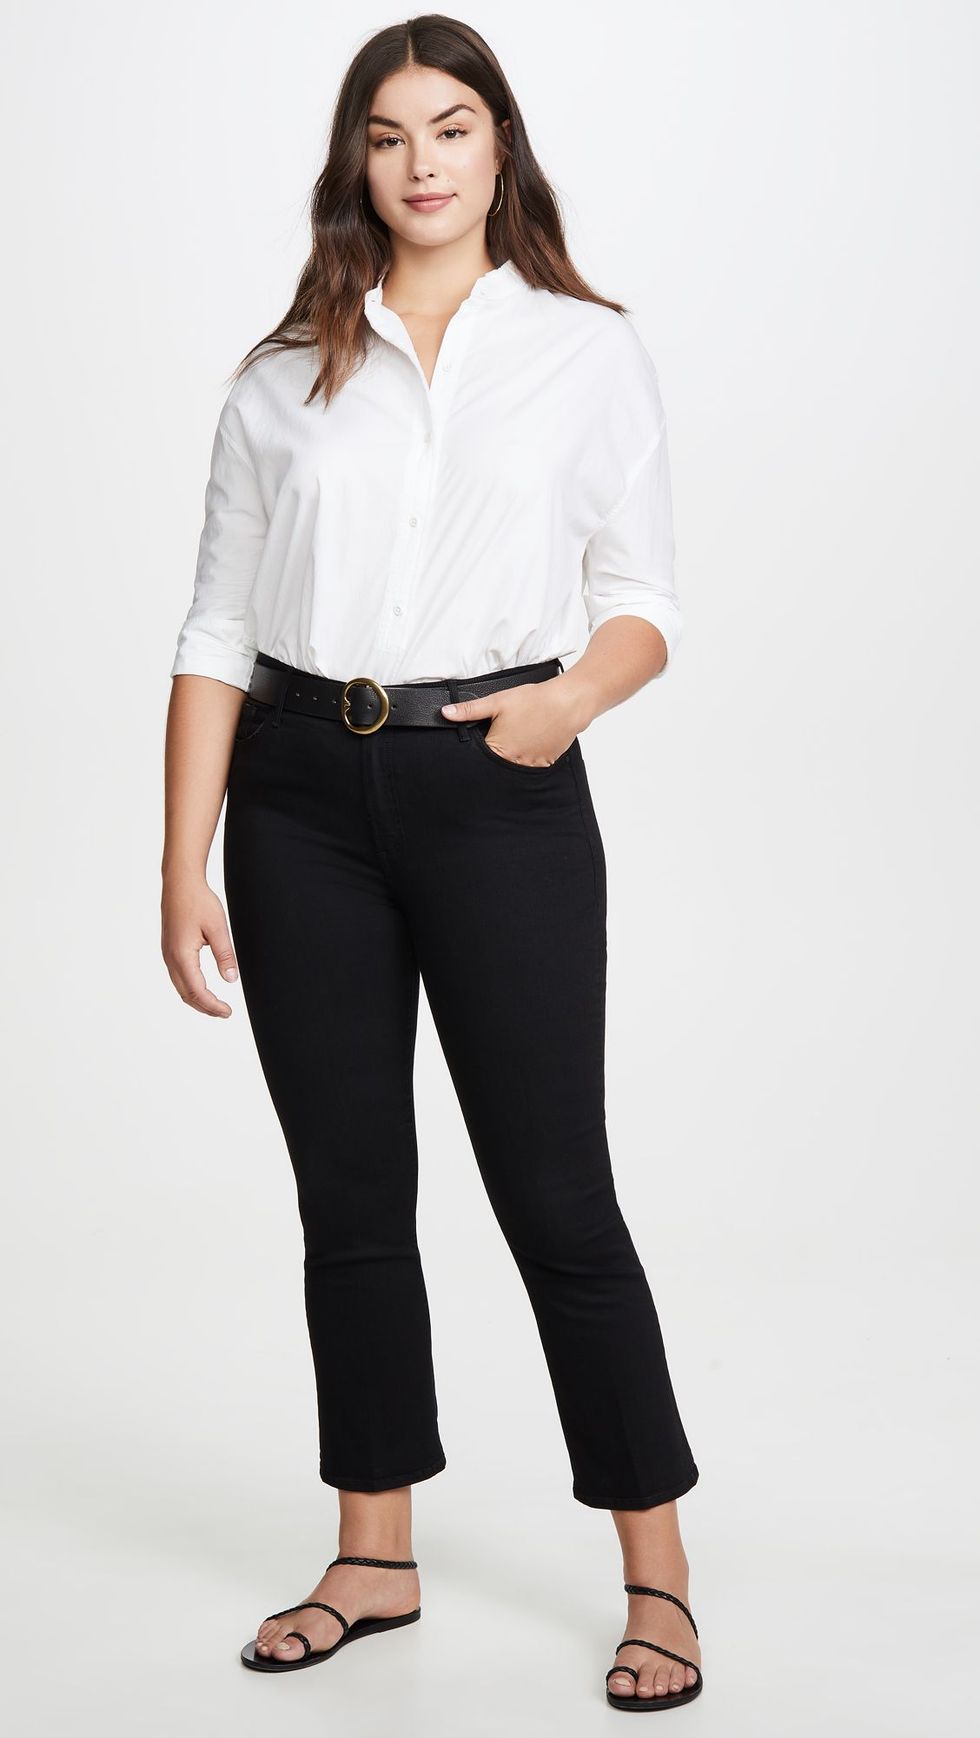 The Insider Crop Jeans